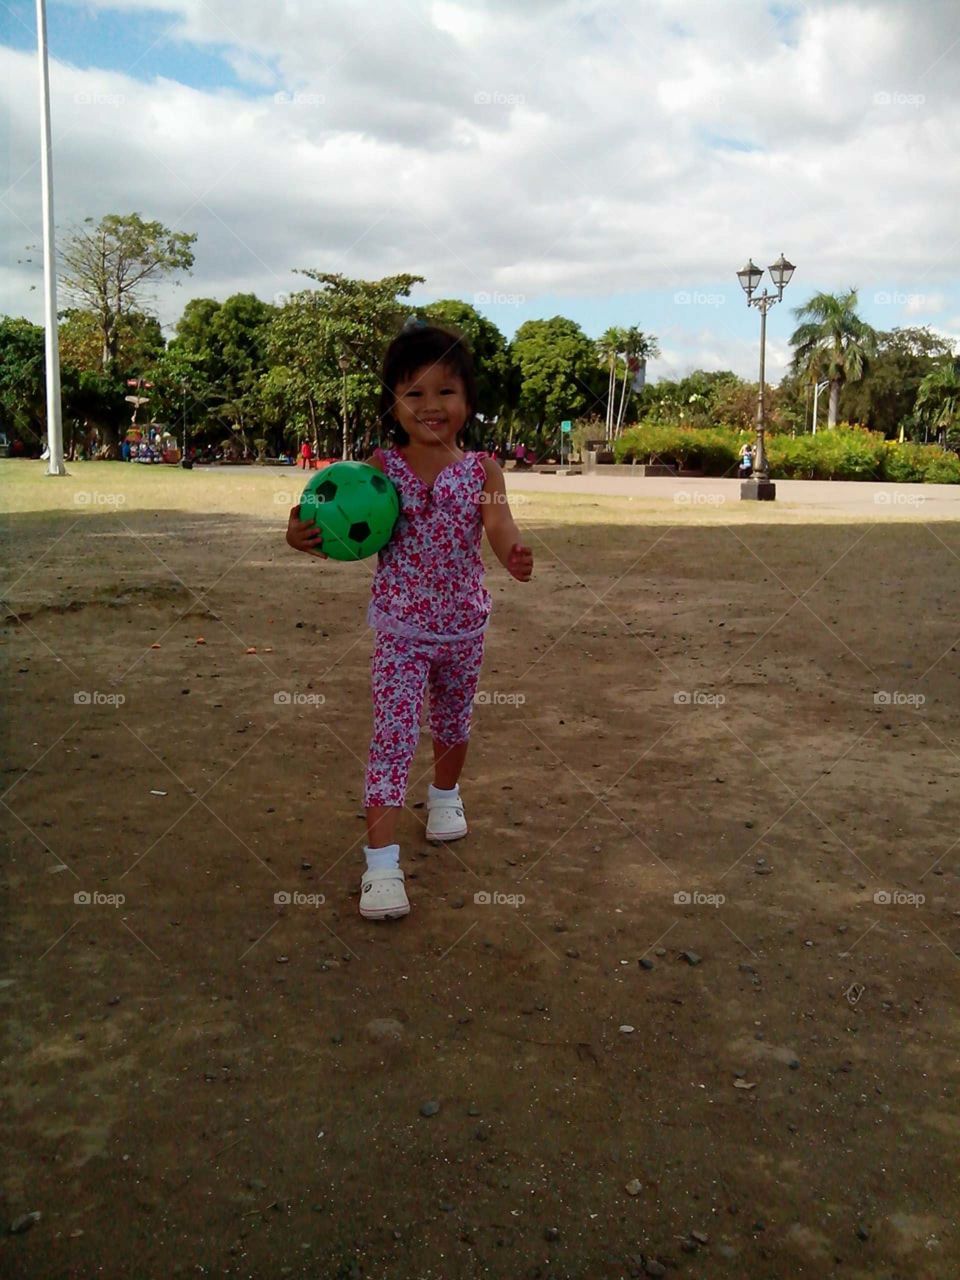 At the park..with her ball